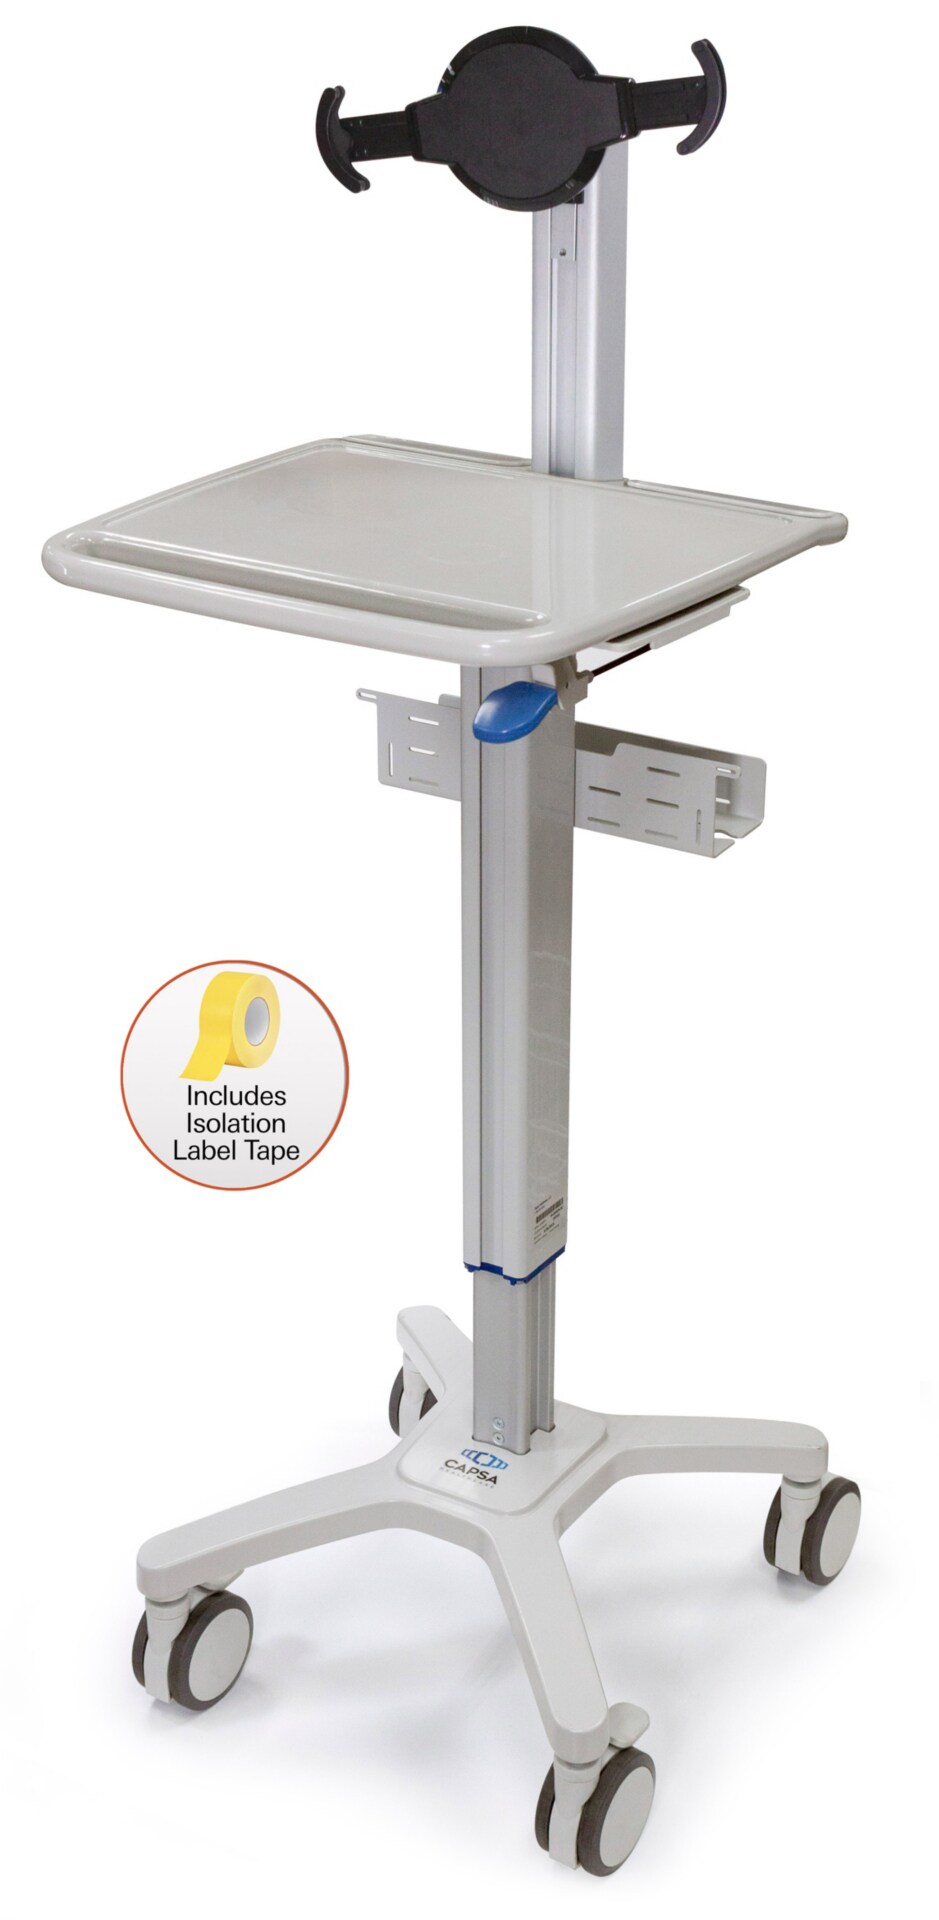 Capsa Healthcare SlimCart Fixed Riser Small Tablet Holder - mounting compon